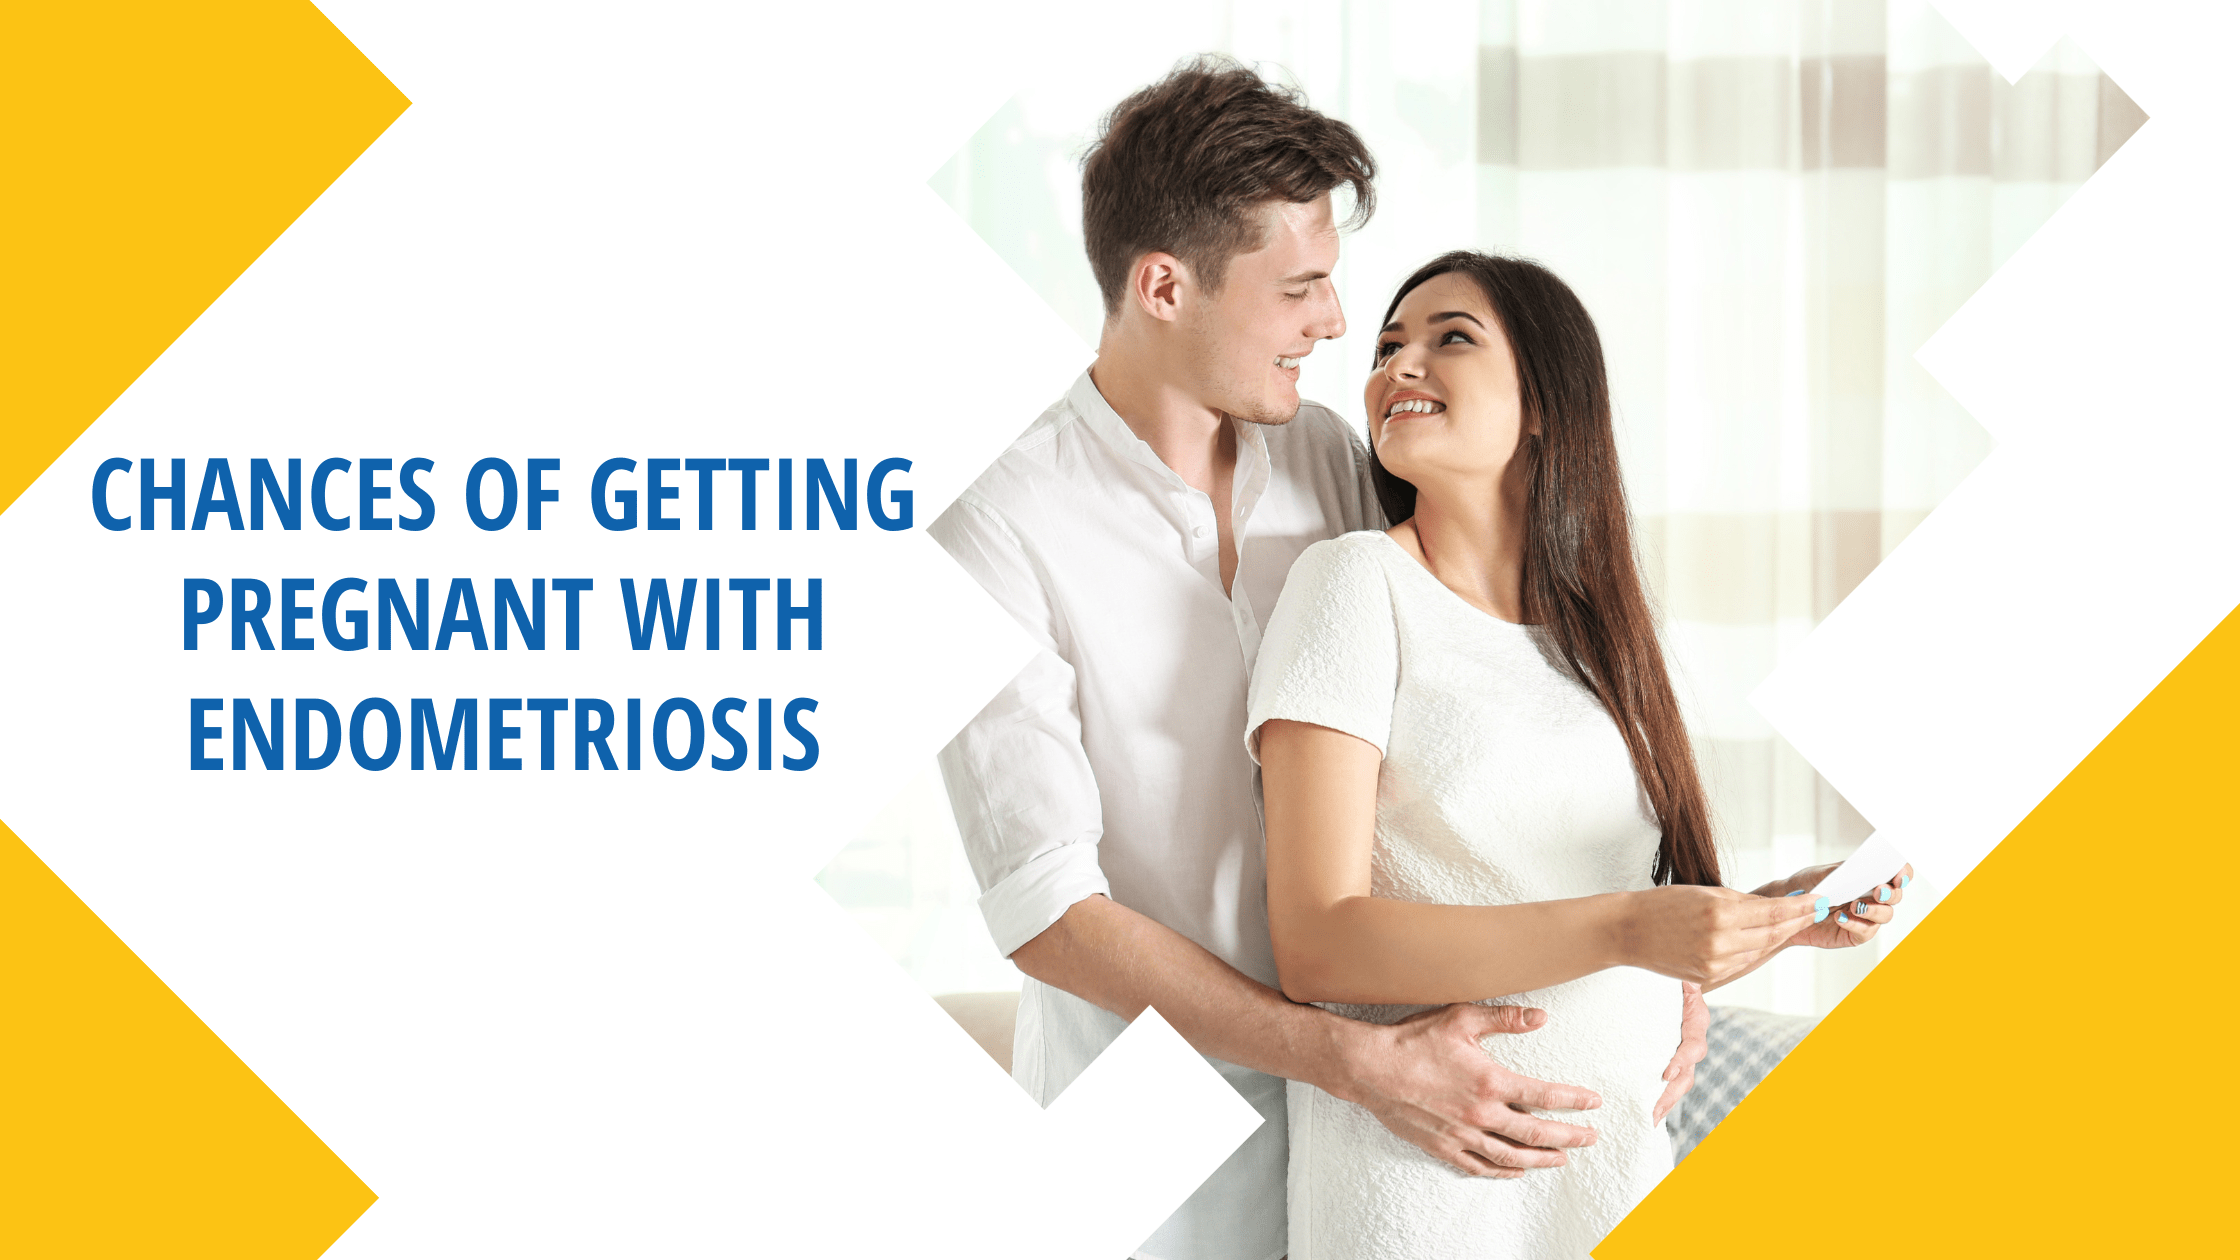 Chances of Getting Pregnant with Endometriosis